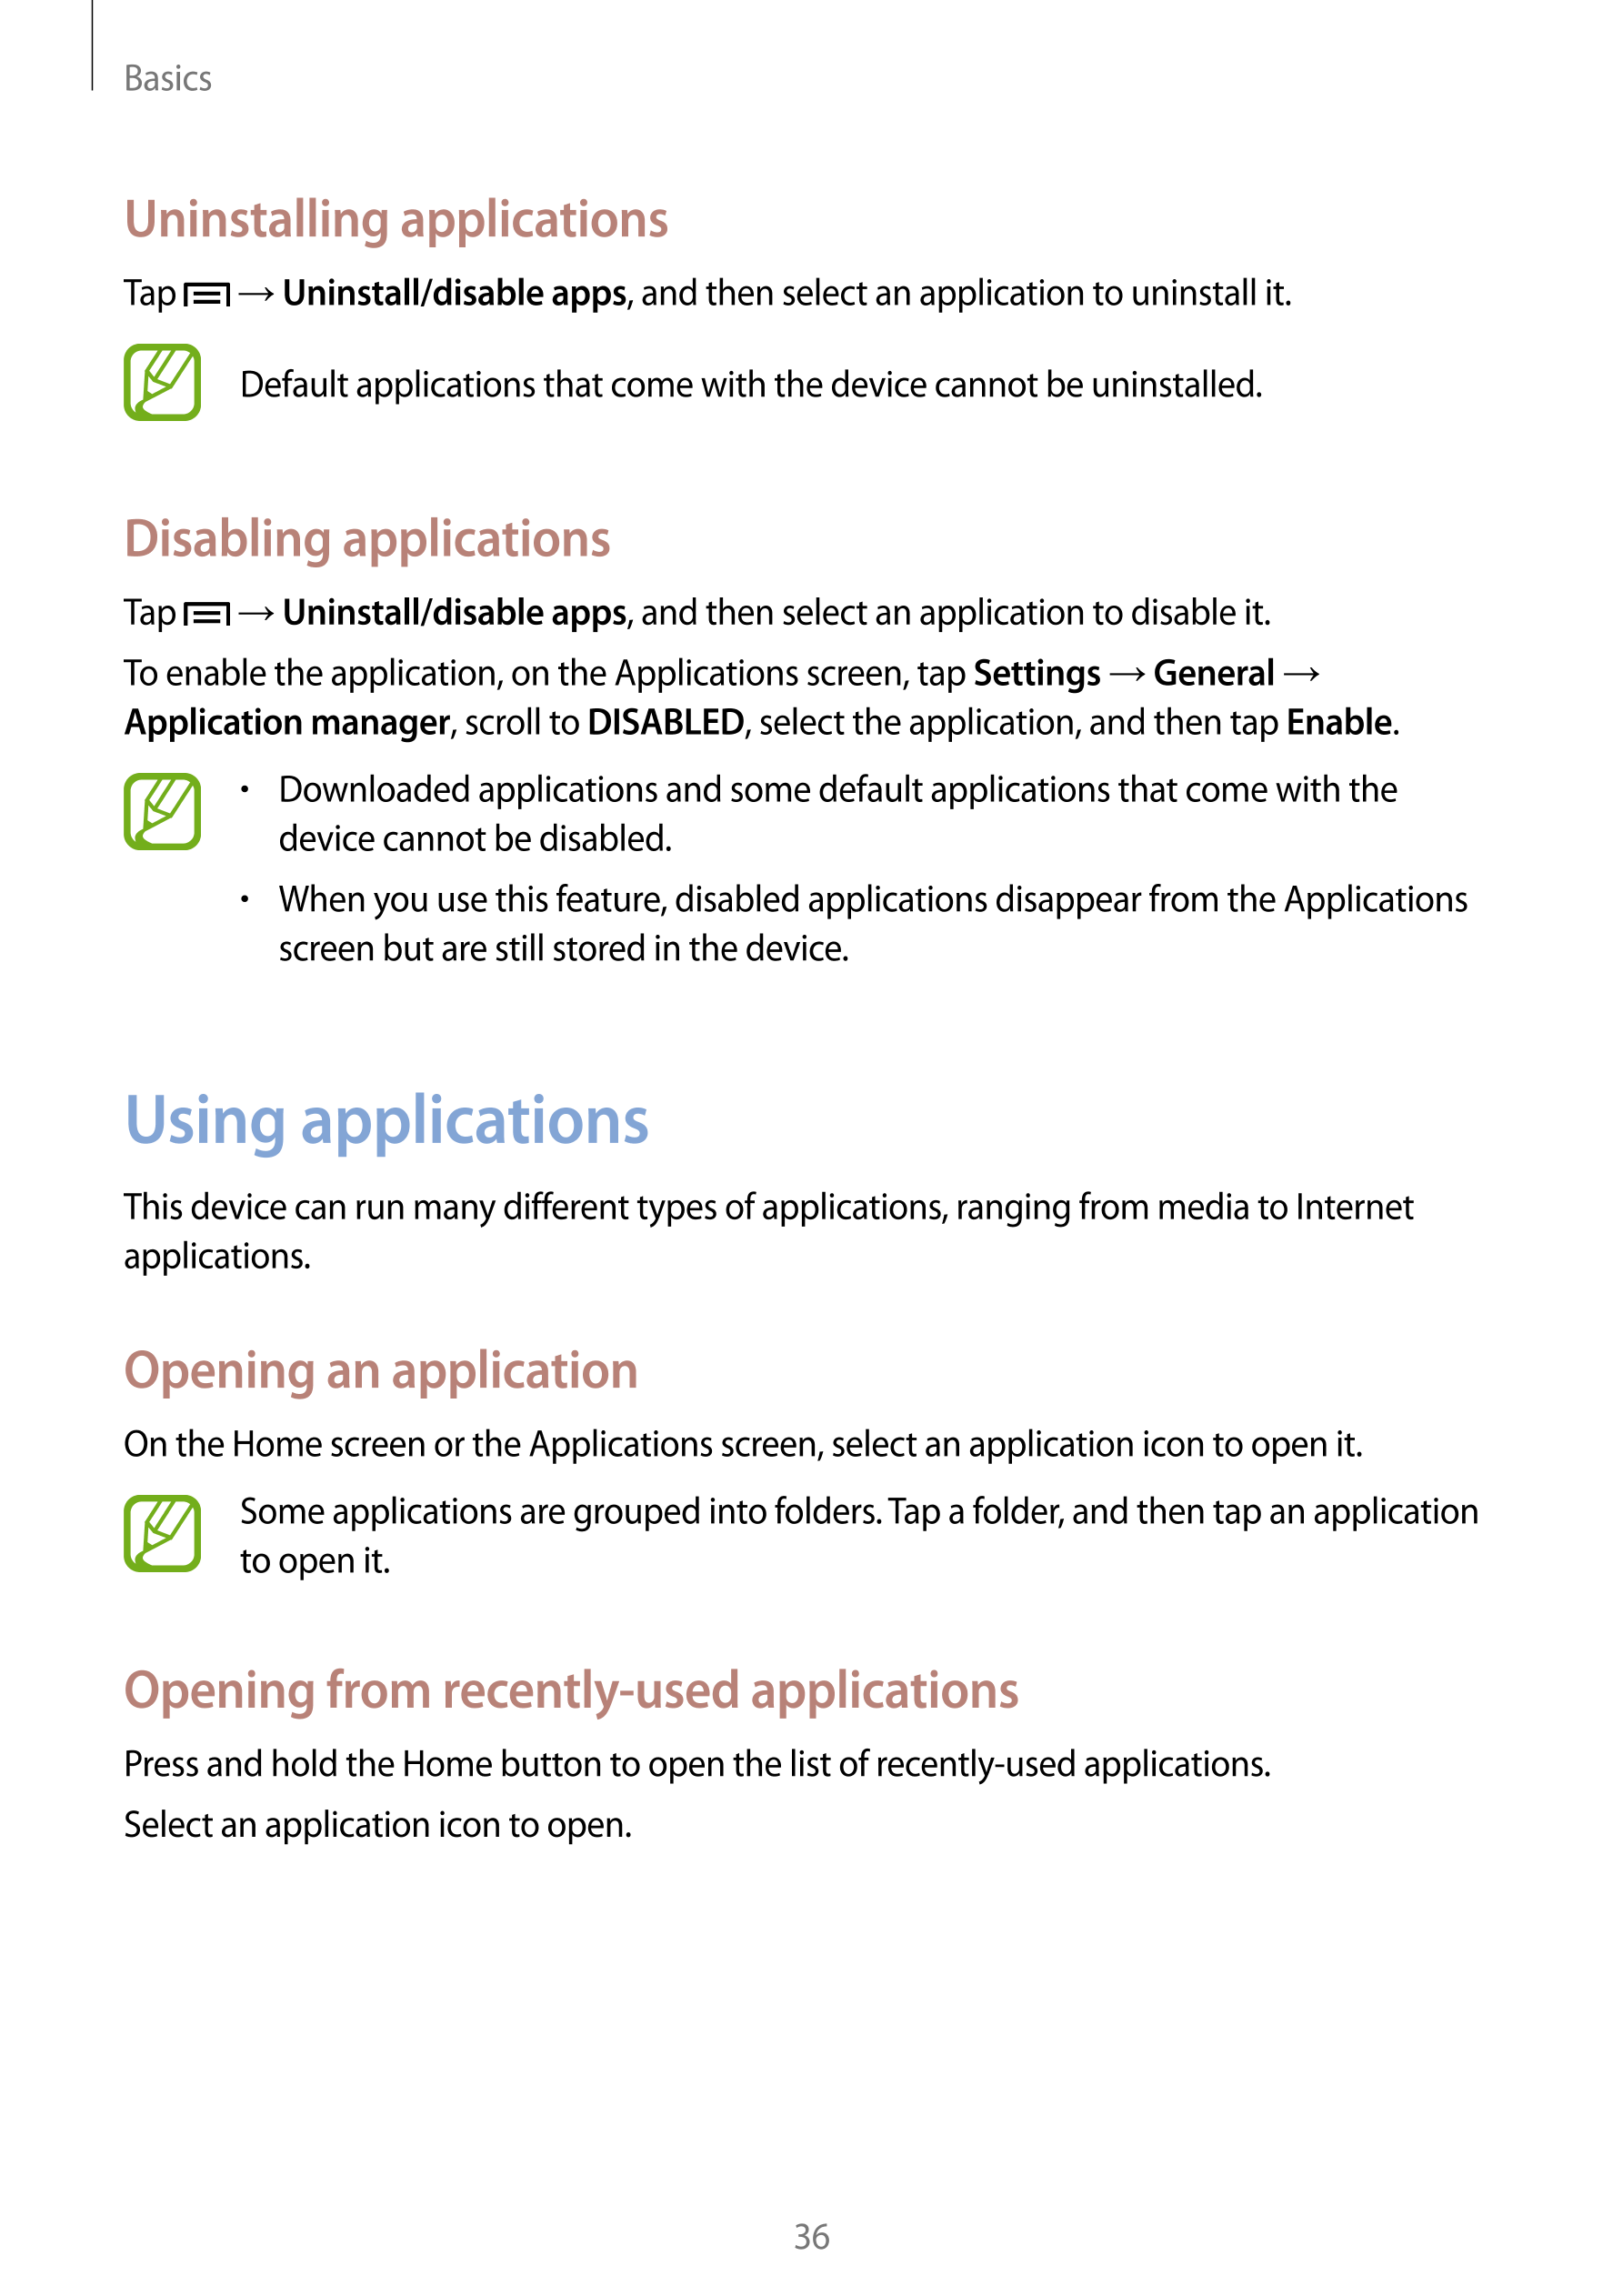 Basics
Uninstalling applications
Tap    →  Uninstall/disable apps, and then select an application to uninstall it.
Default appli